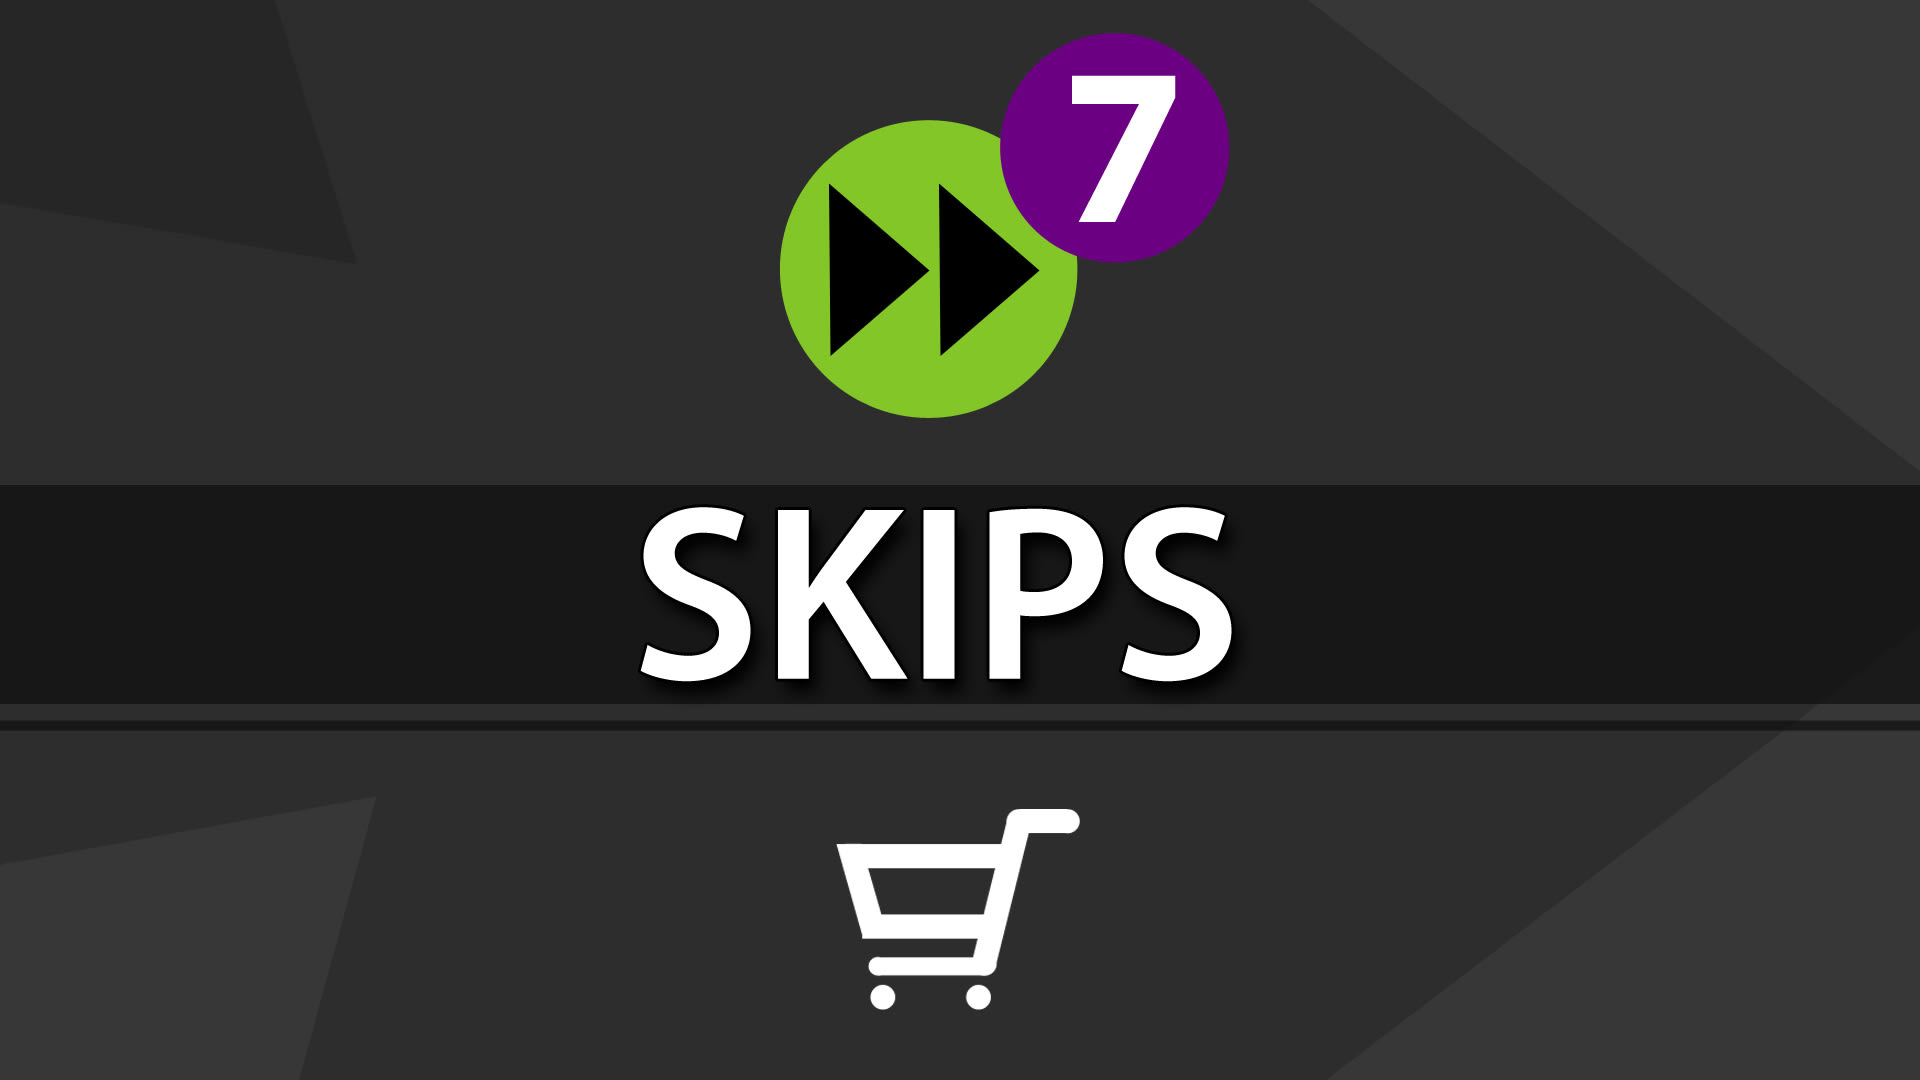 Add 7 more skips for each mode